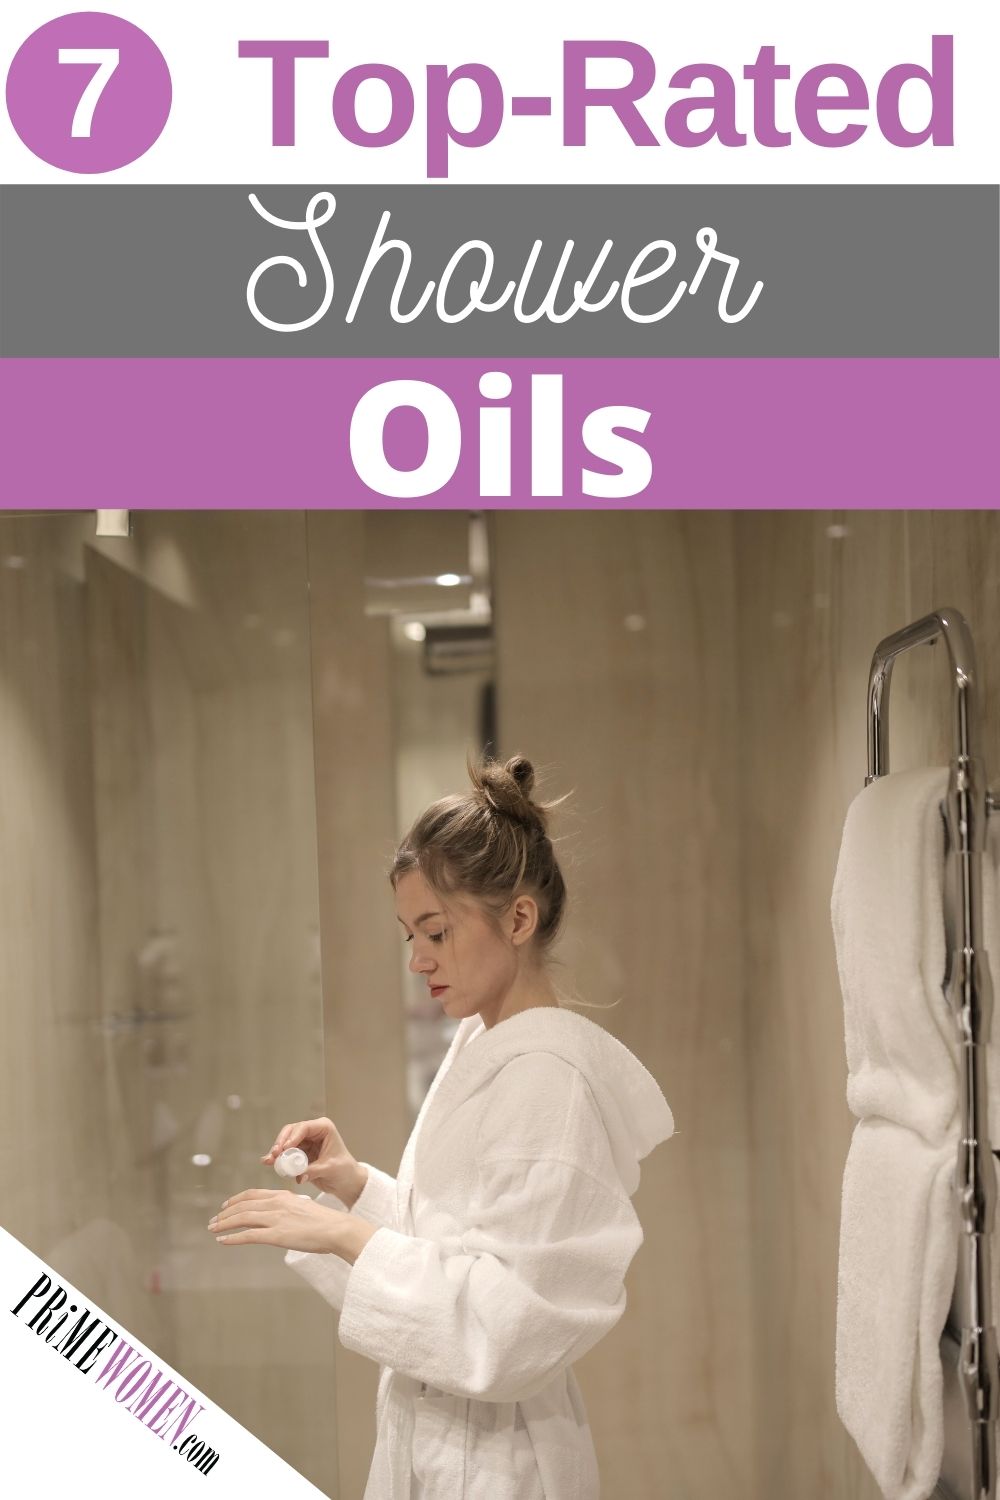 7 Top-Rated Shower Oils